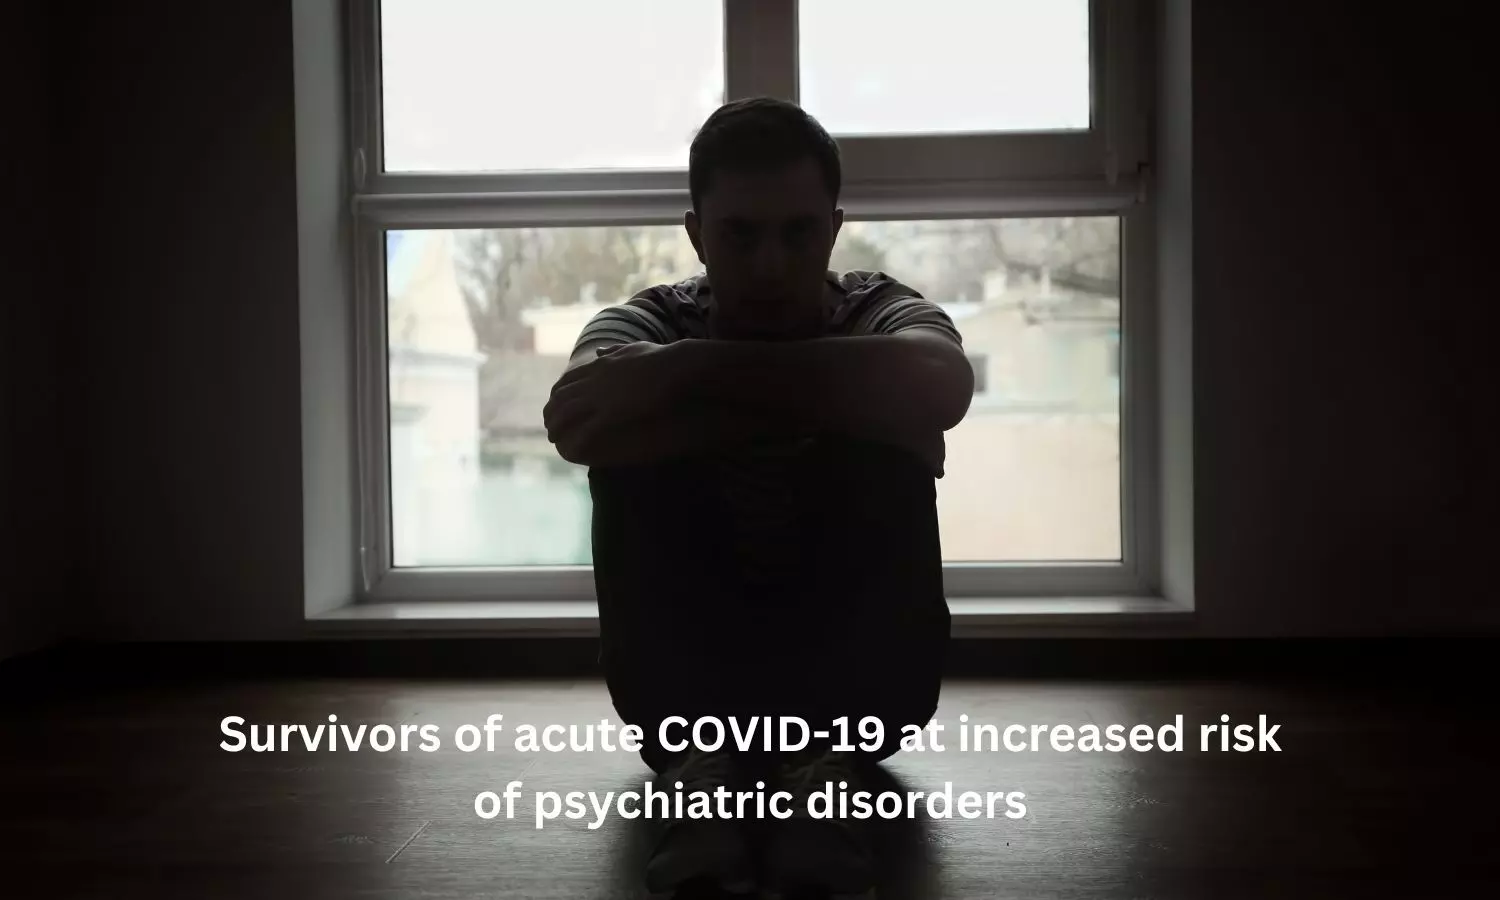 Acute Covid-19 survivors at increased risk of psychiatric disorders: Expert